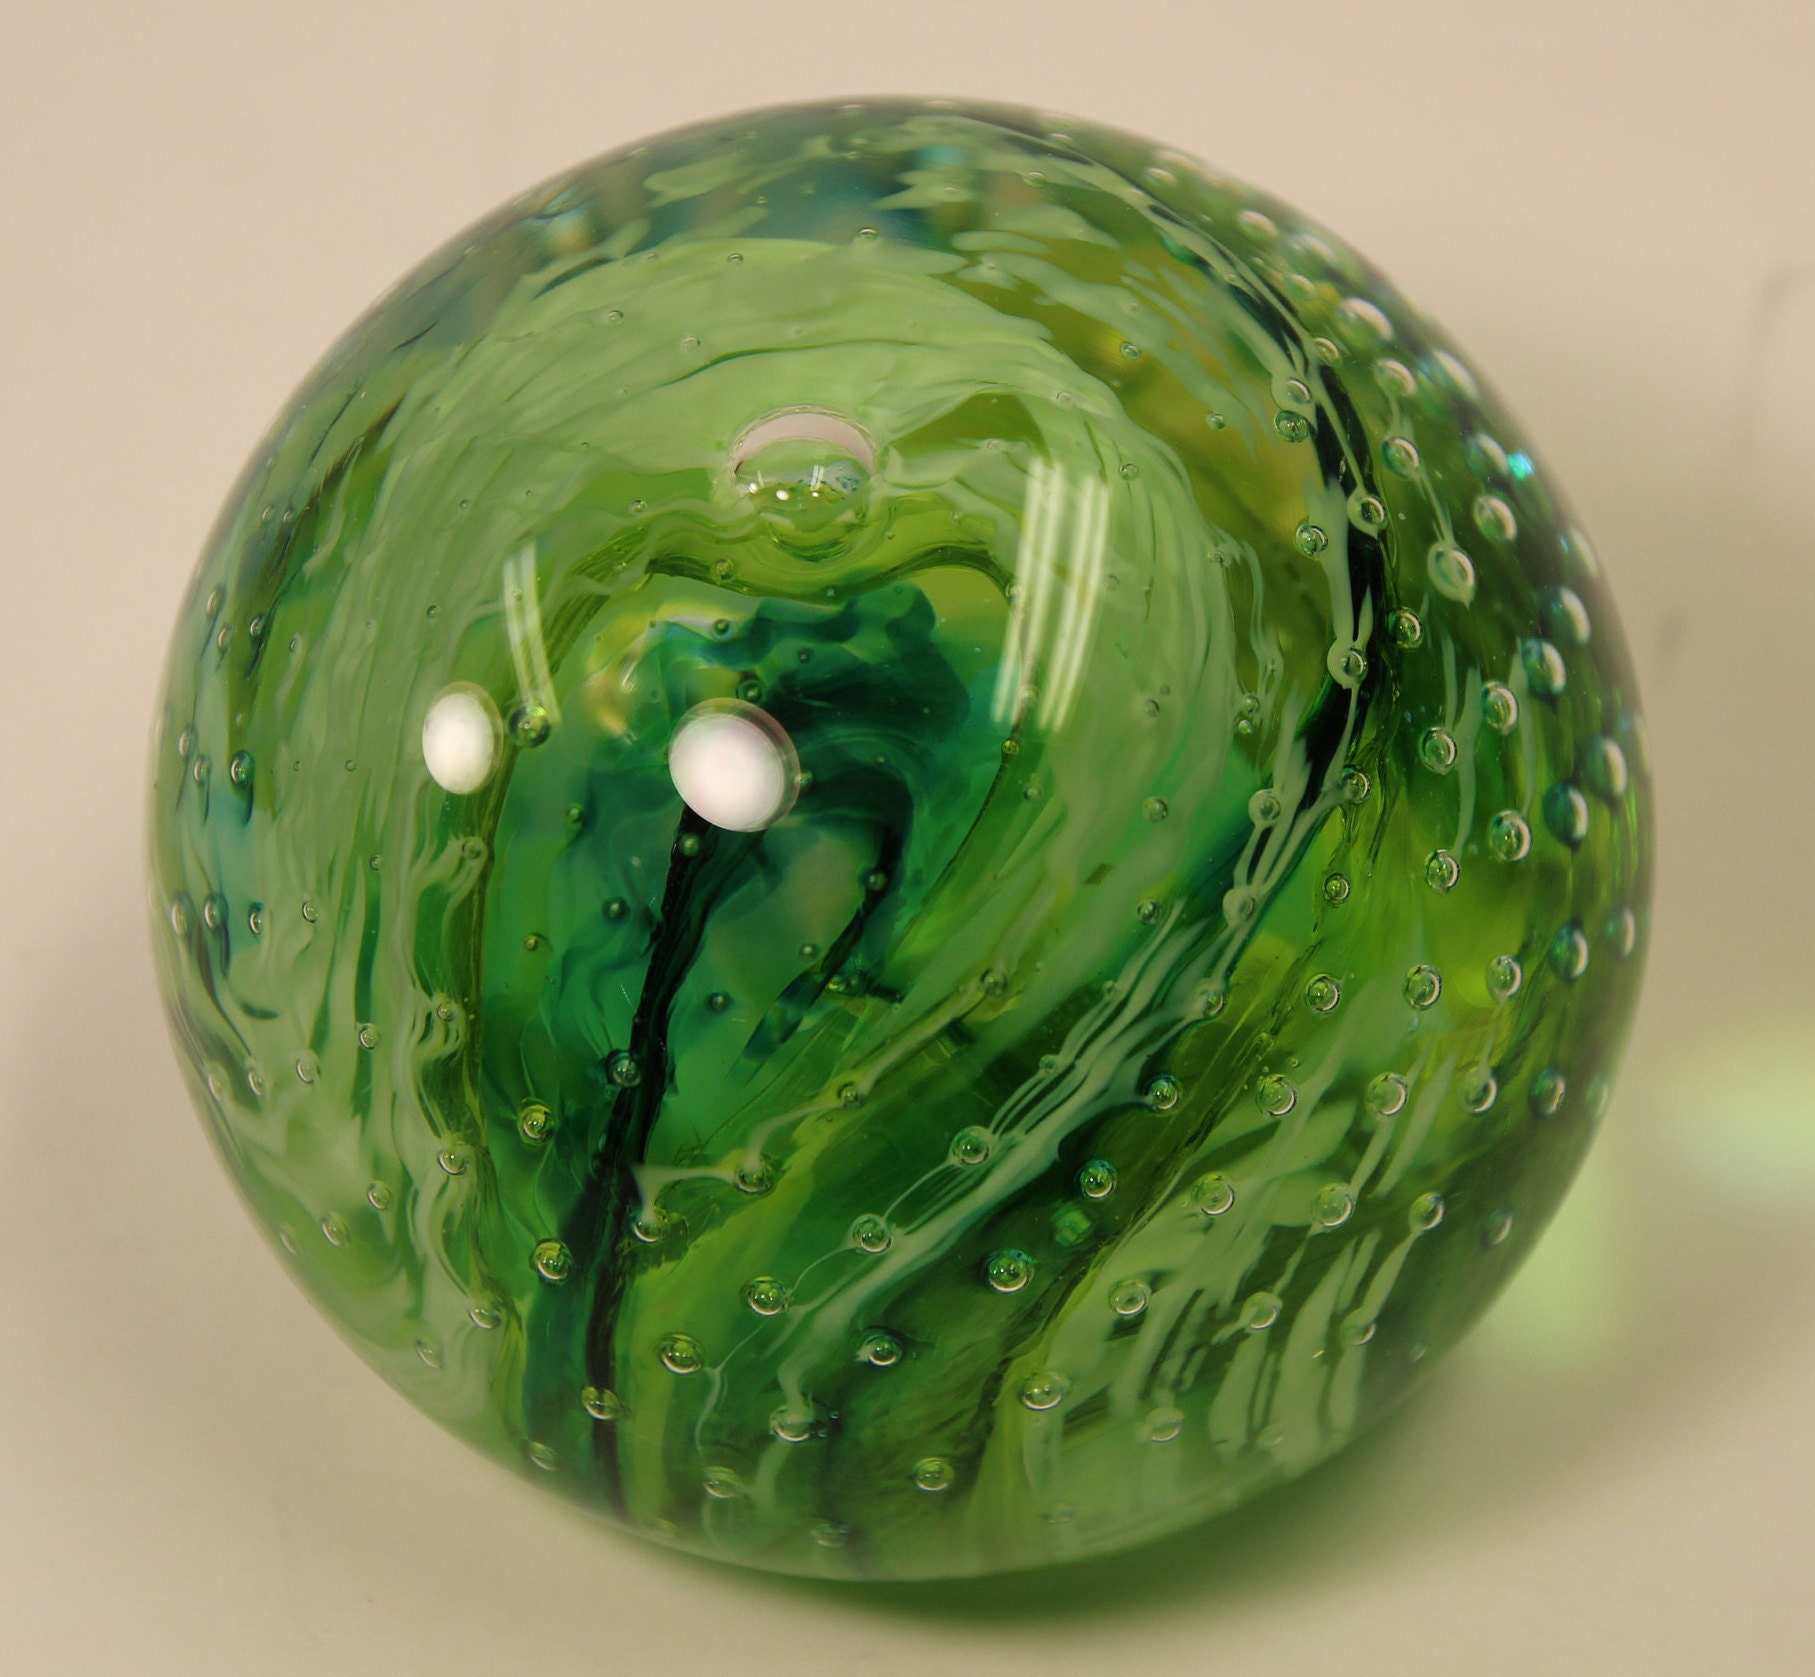 Green Swirl Glass Orb Paperweight | Etsy